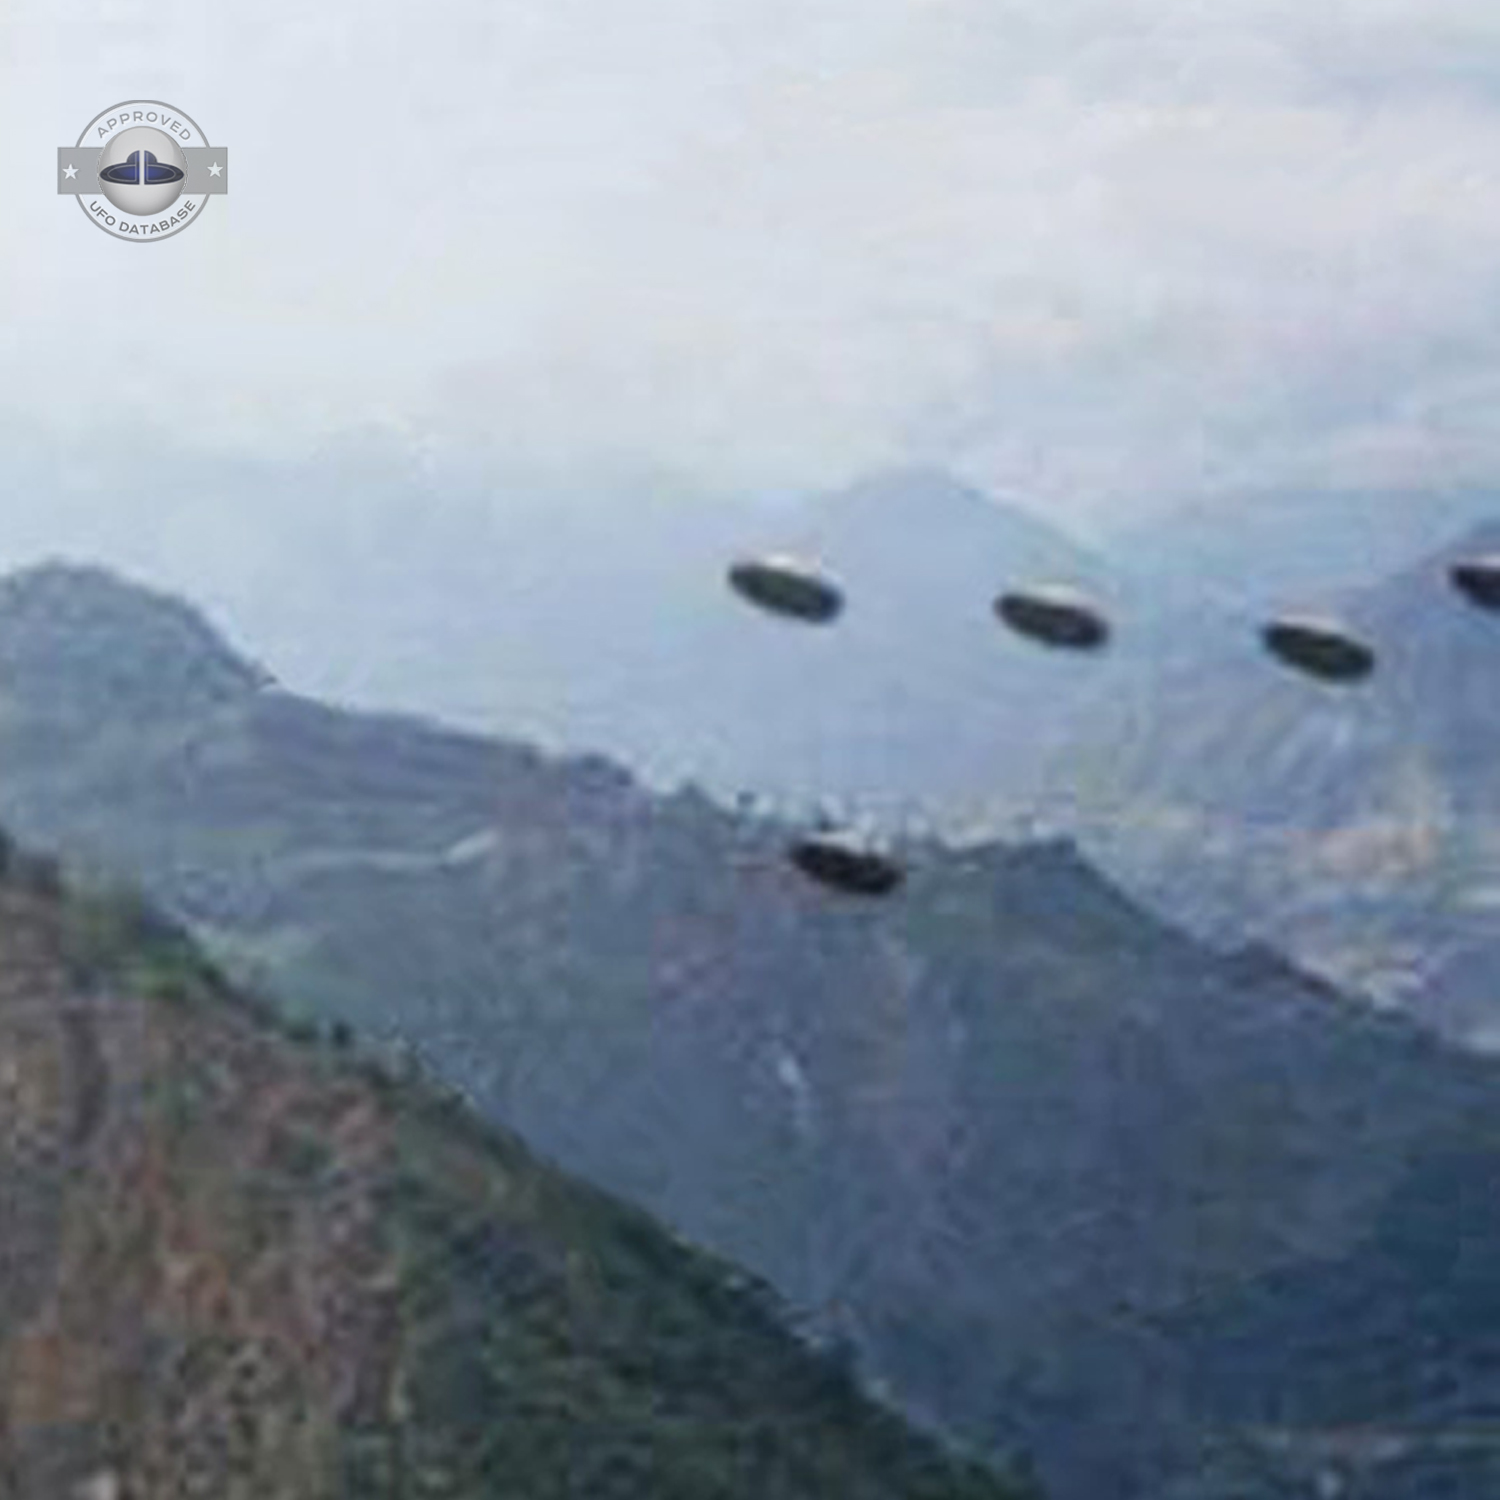 Fleet of 5 UFOs flying in precise formation Hills of Sombaria Gangtok UFO Picture #202-5